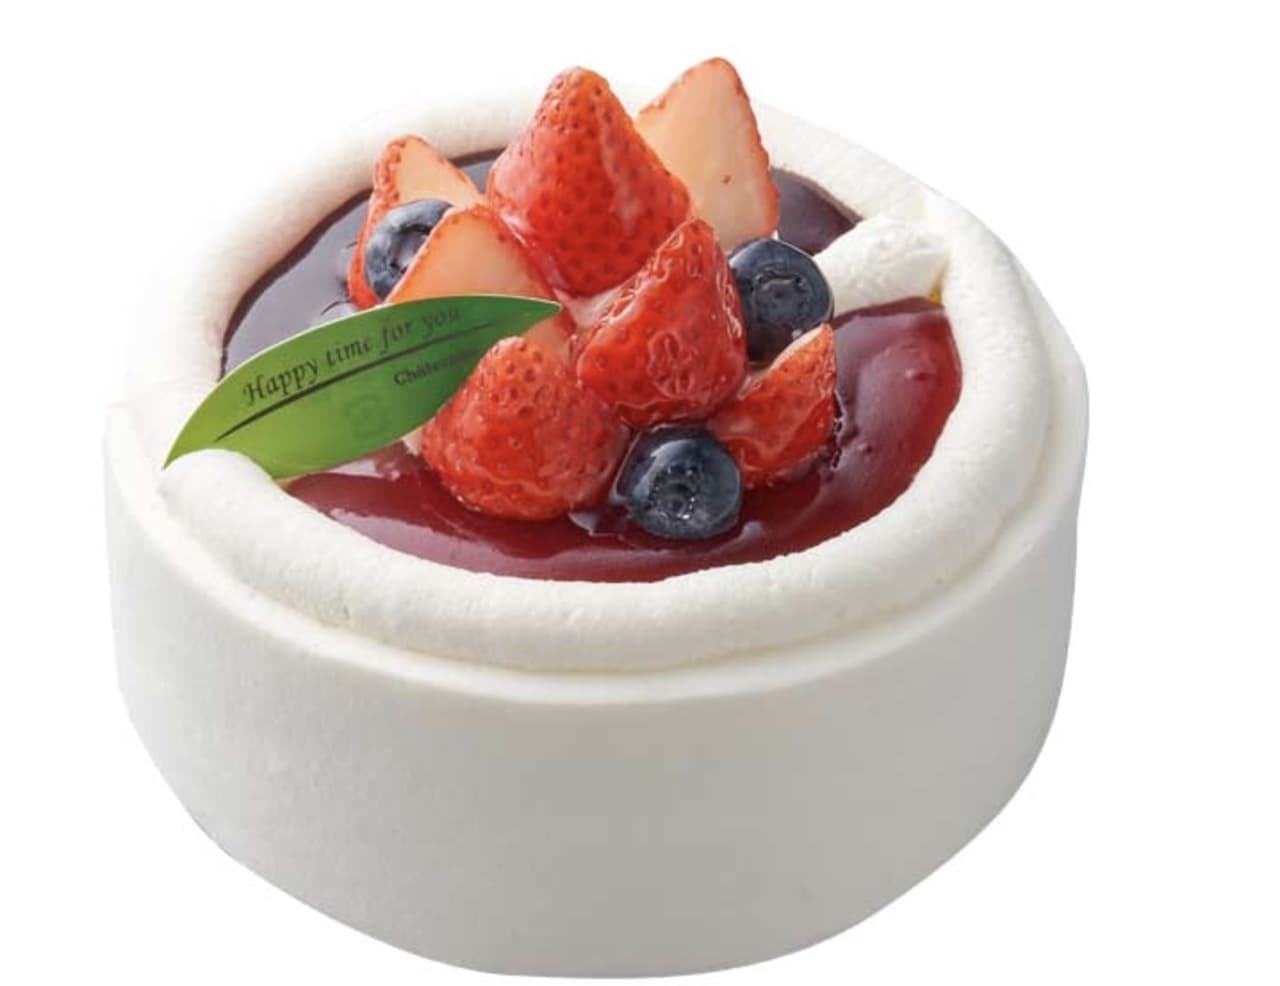 Chateraise "Strawberry and Blueberry Souffle Cheese Decoration"